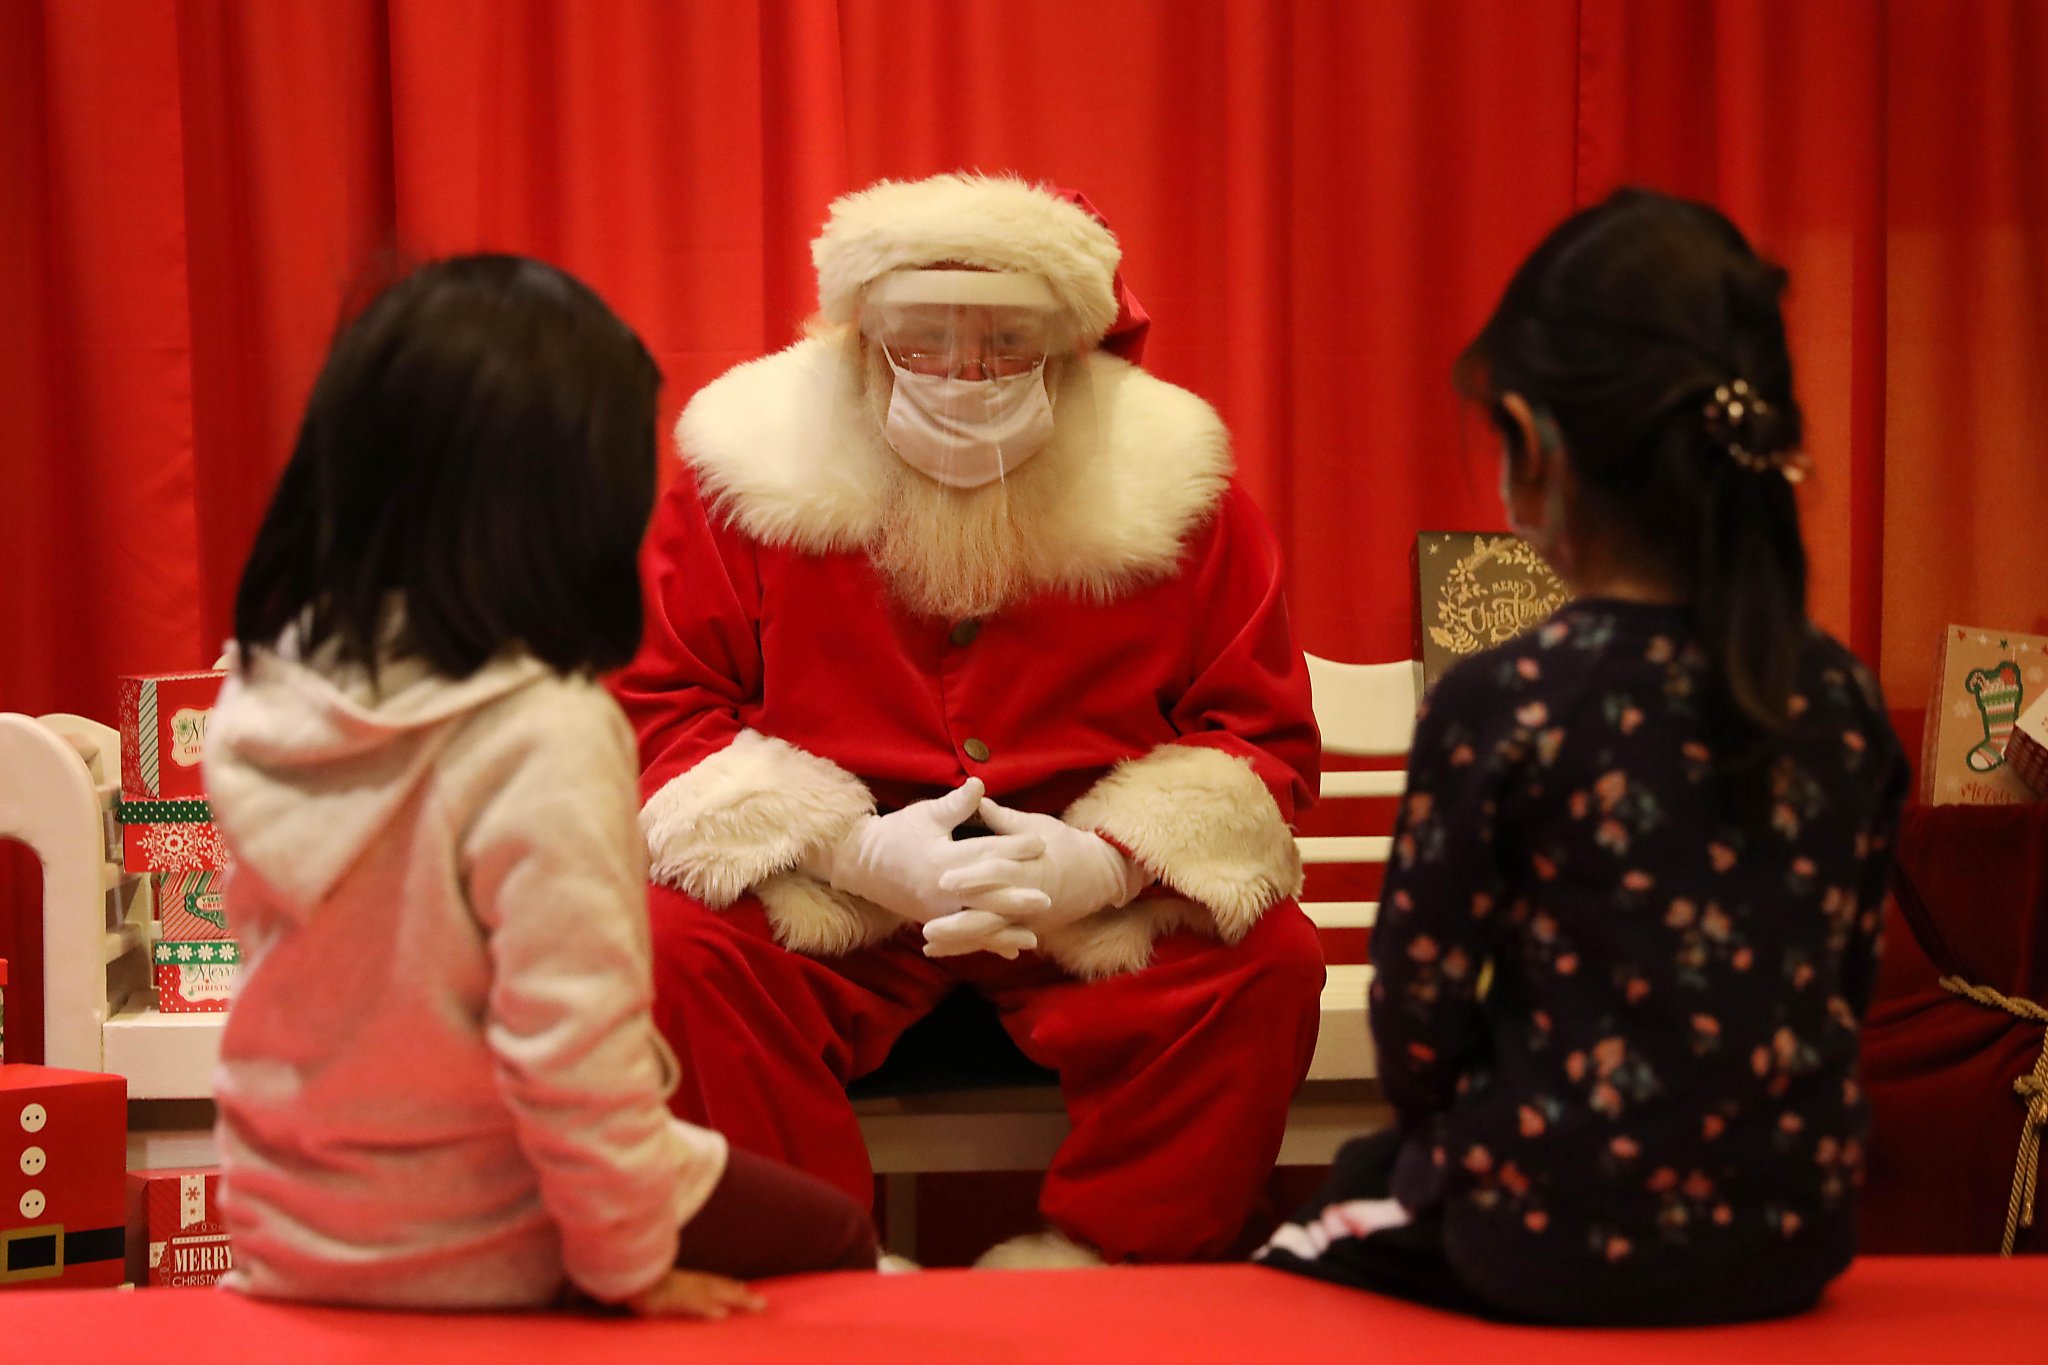 Mall Santas will look different this year. Here's what to expect in the